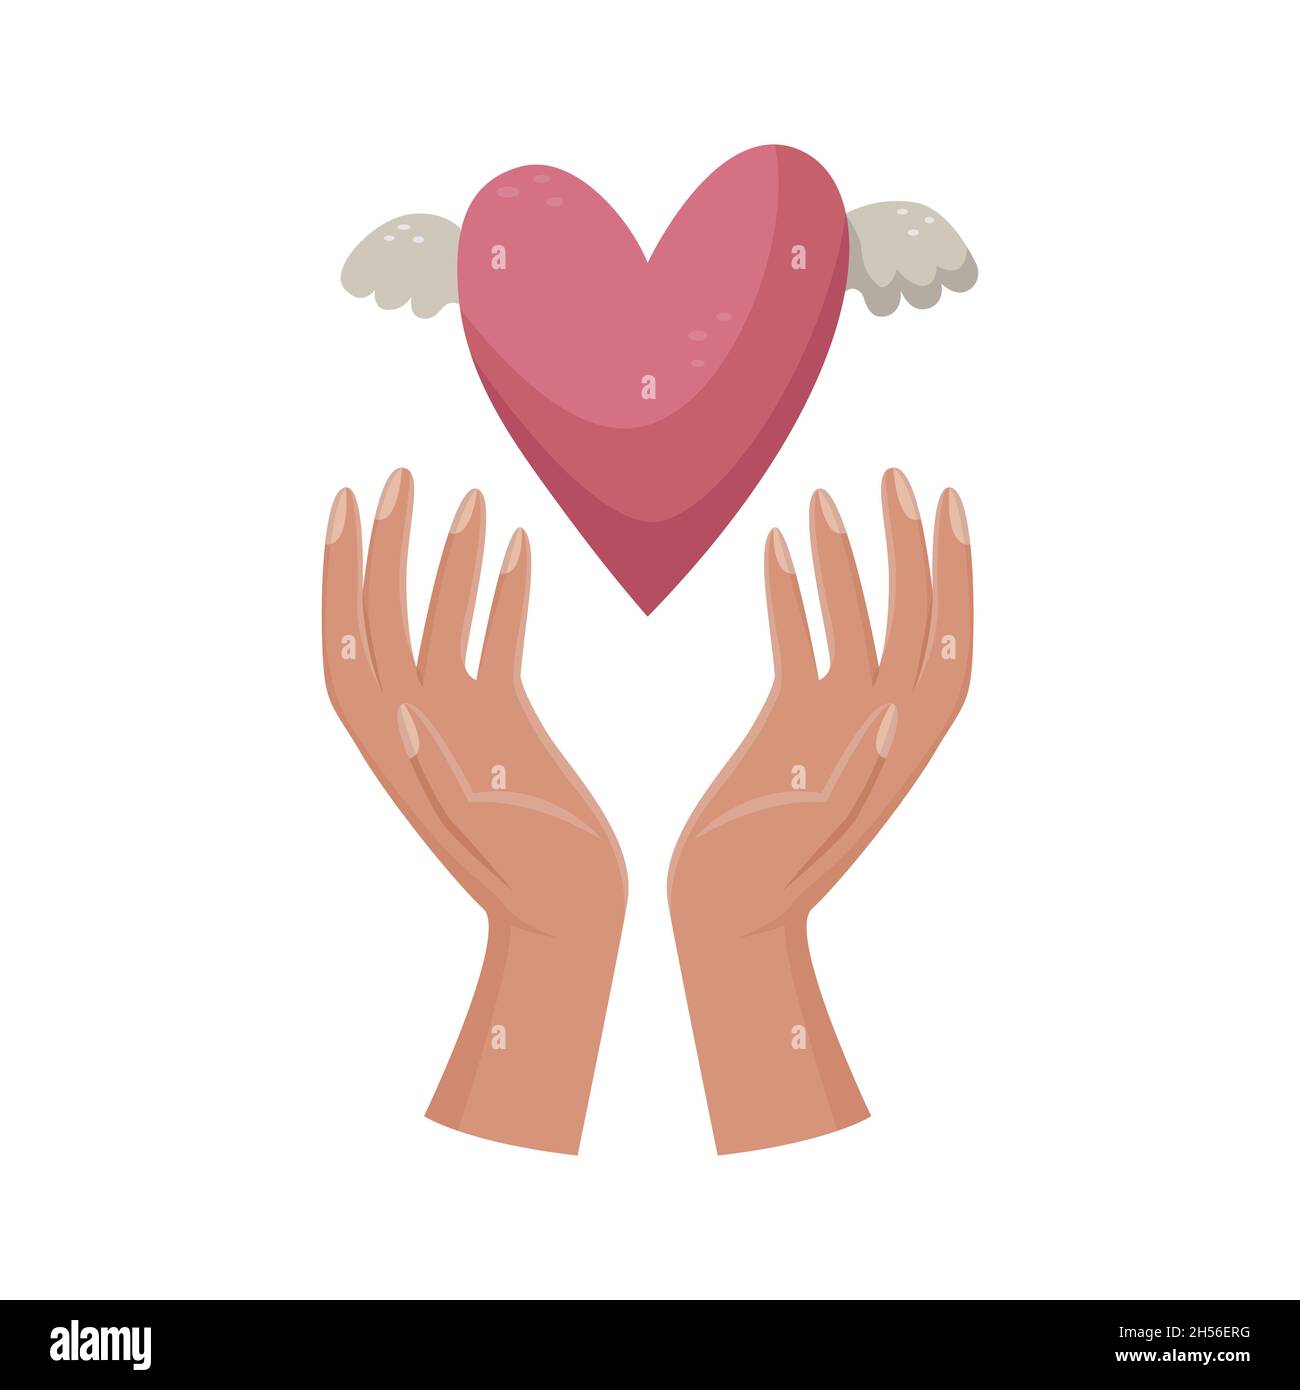 Vector Illustration Of A Woman Holding A Heart Under Her Hands Hand Gestures Flat Style